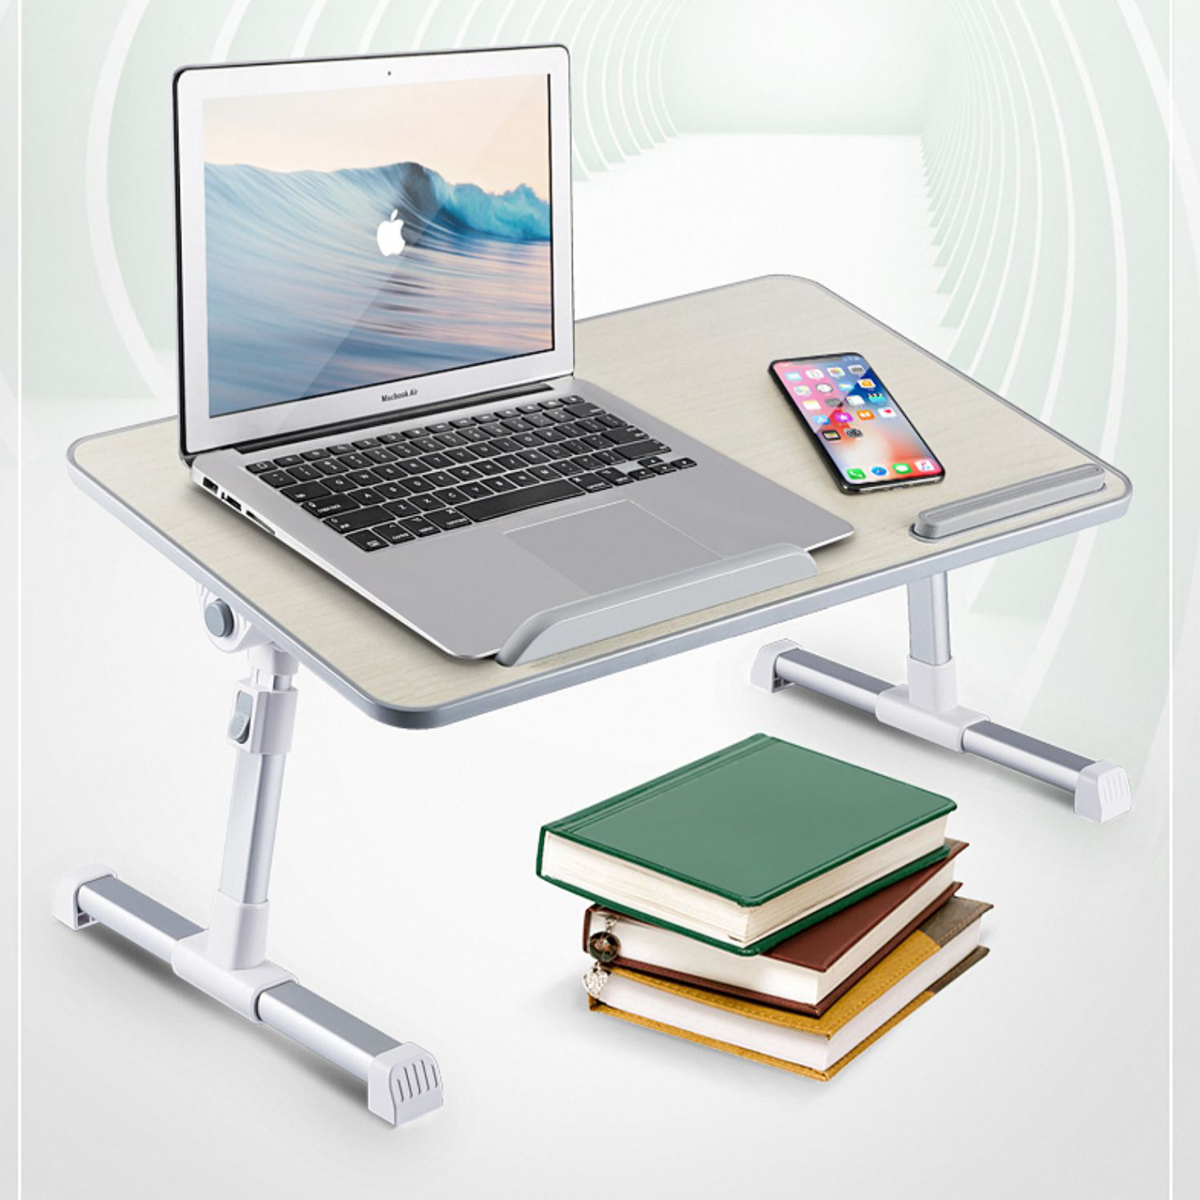 Foldable-Laptop-Desk-Adjustable-Height-Computer-Notebook-Desk-Breakfast-Serving-Table-Bed-Tray-Home--1750162-7